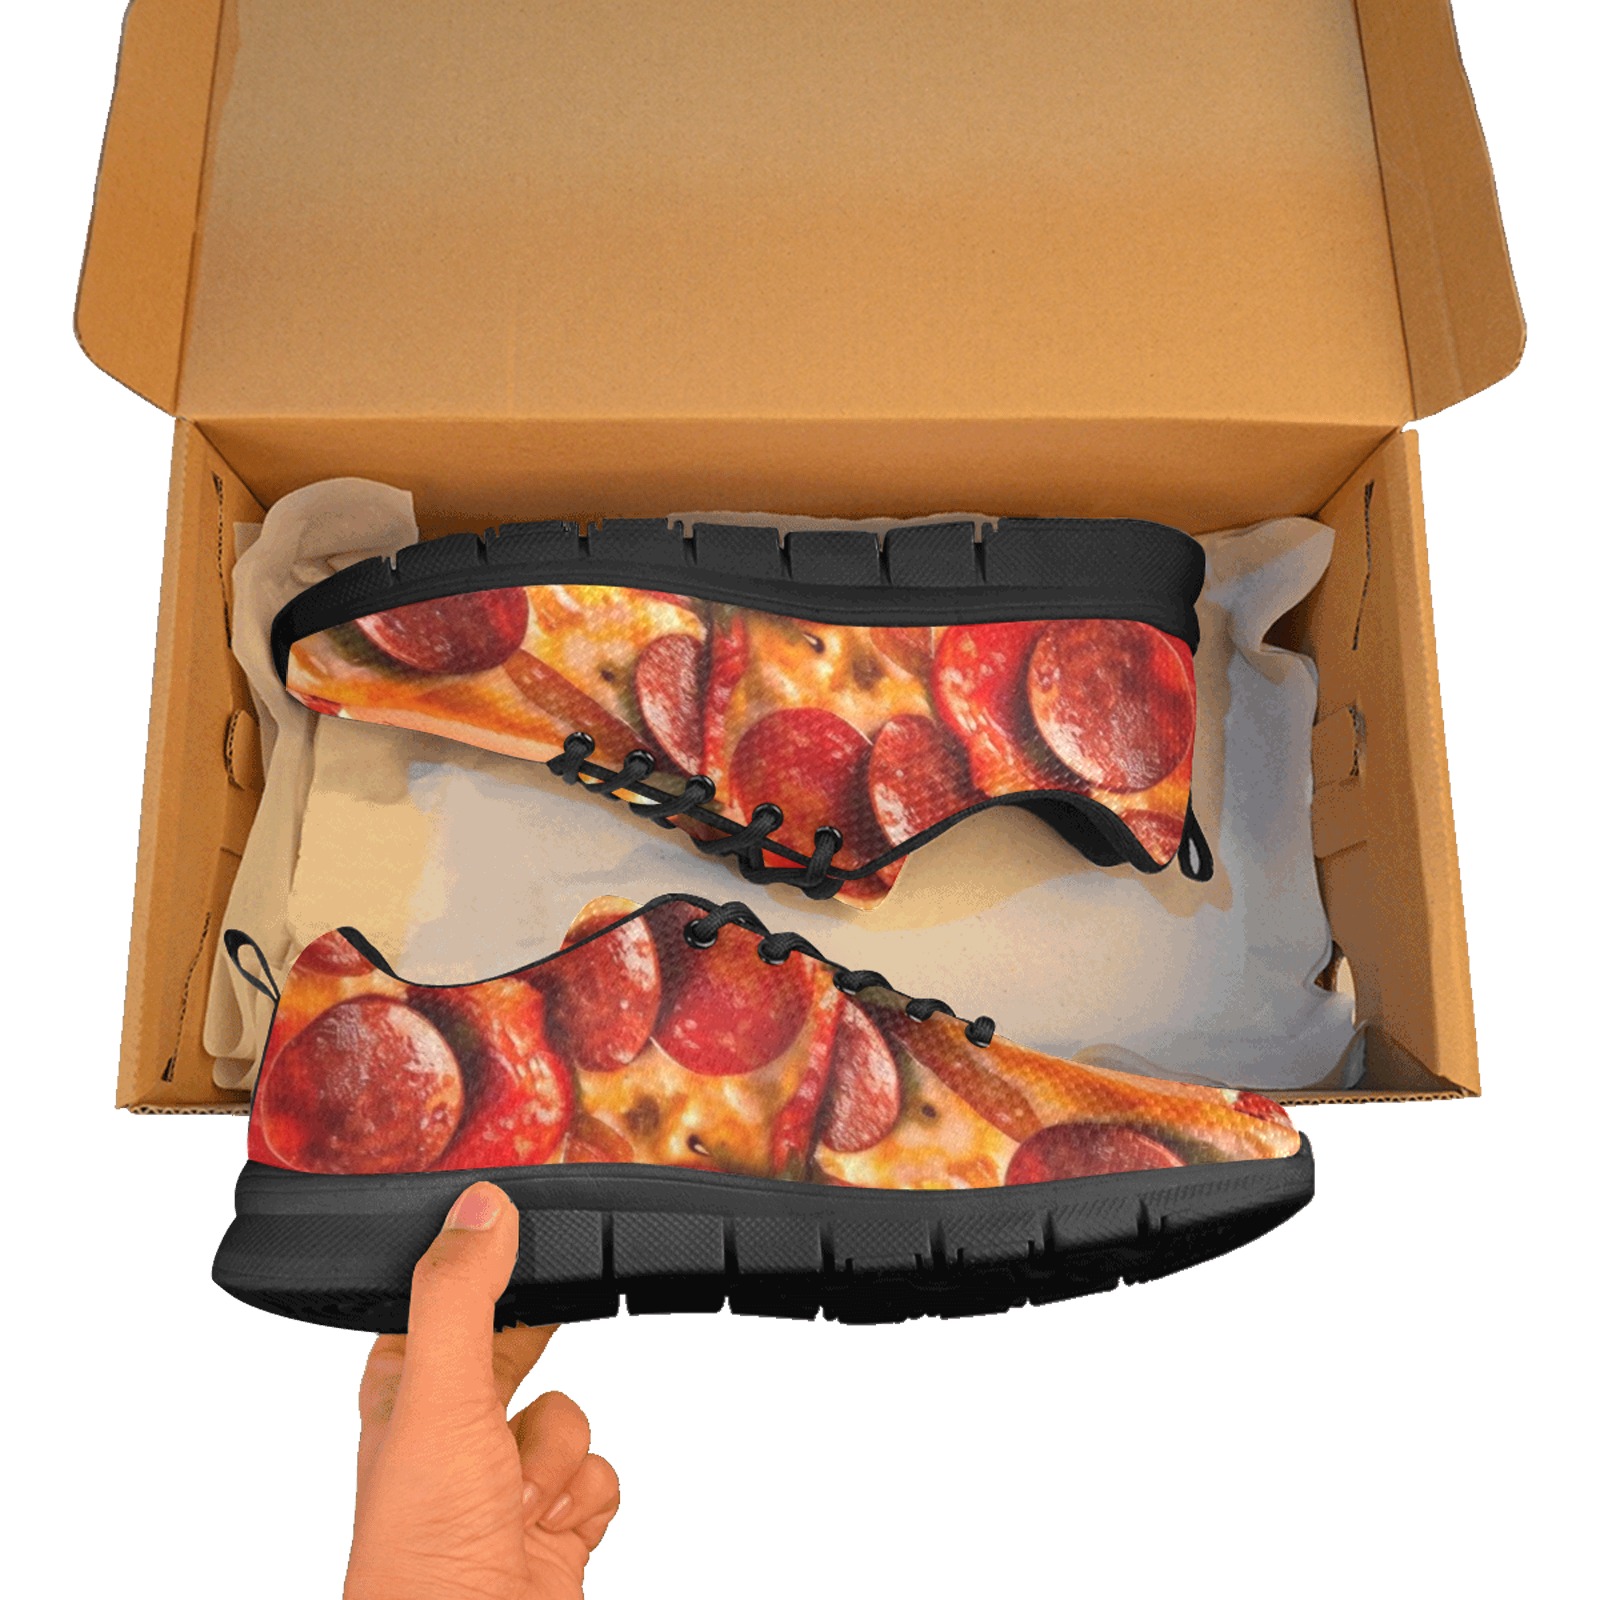 PEPPERONI PIZZA 11 Men's Breathable Running Shoes (Model 055)